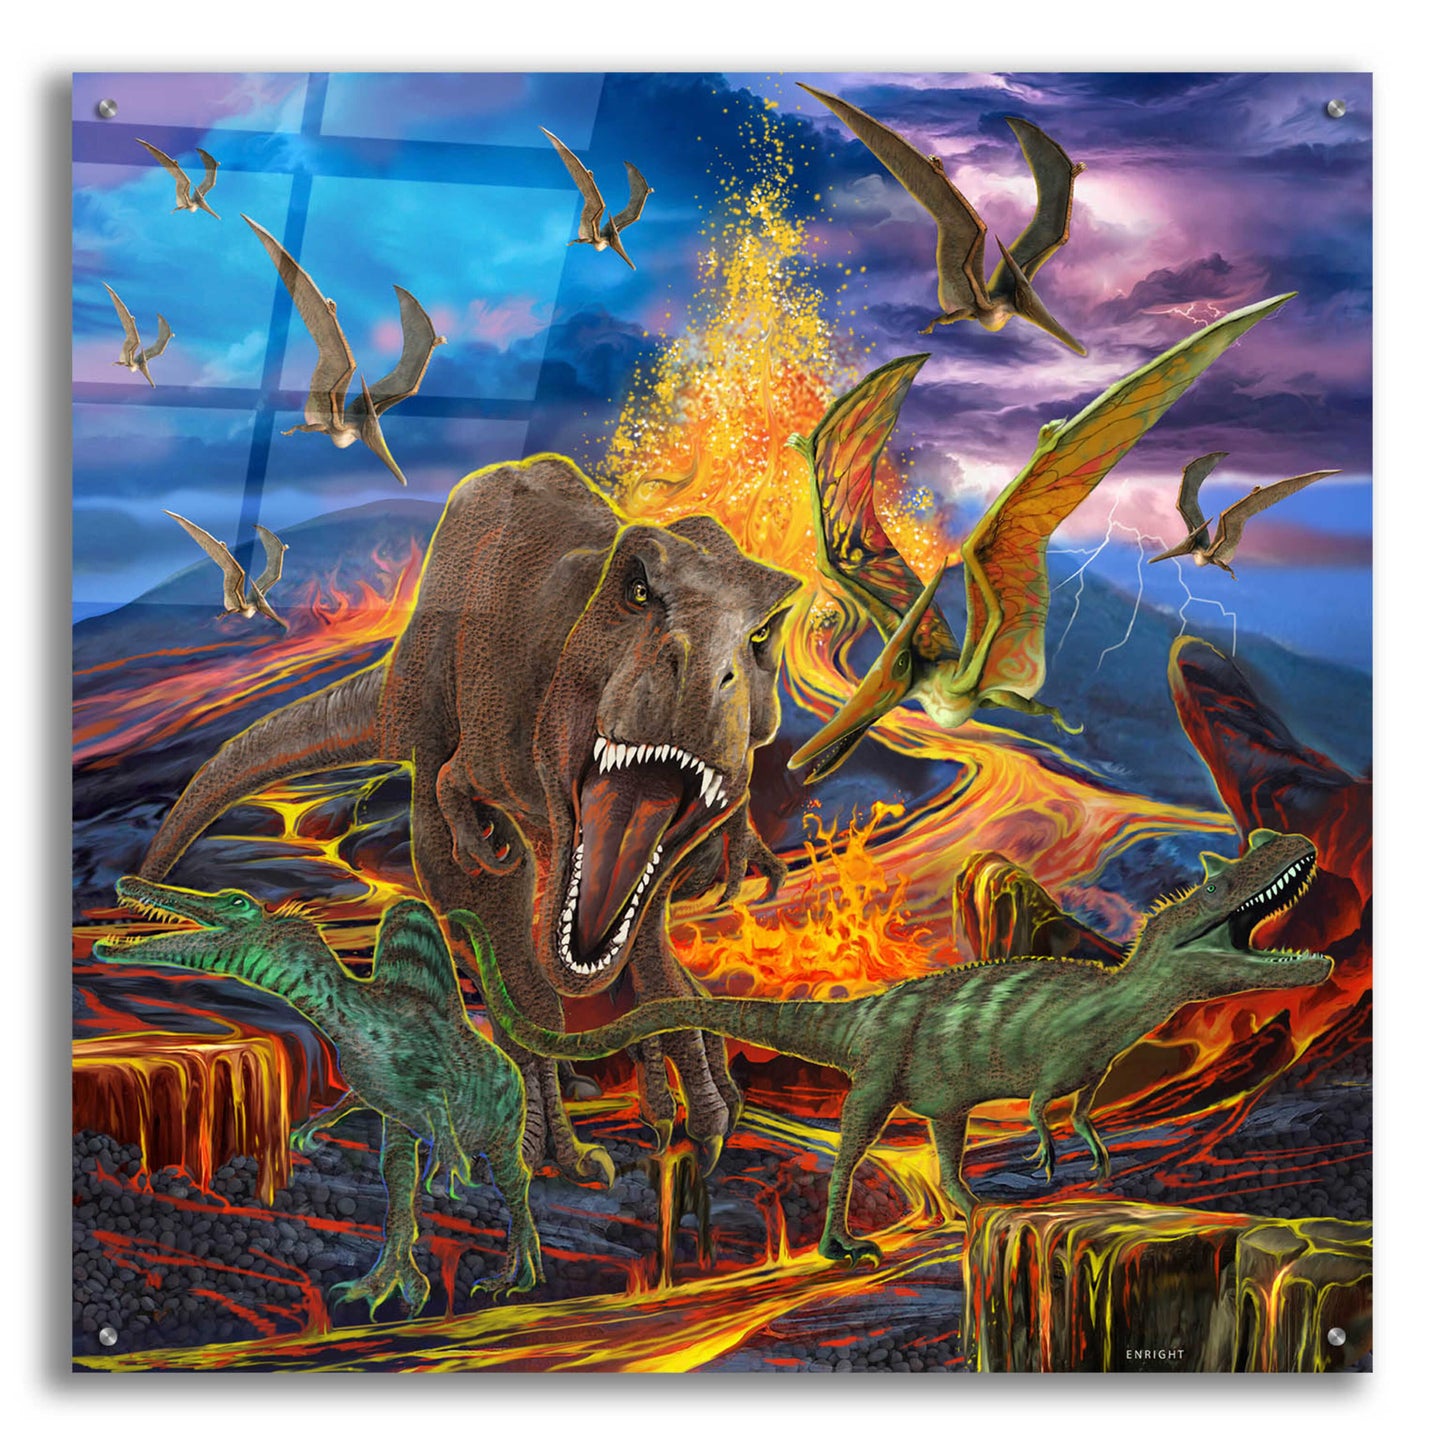 Epic Art 'Kingdom Of The Dinosaurs' by Enright, Acrylic Glass Wall Art,36x36